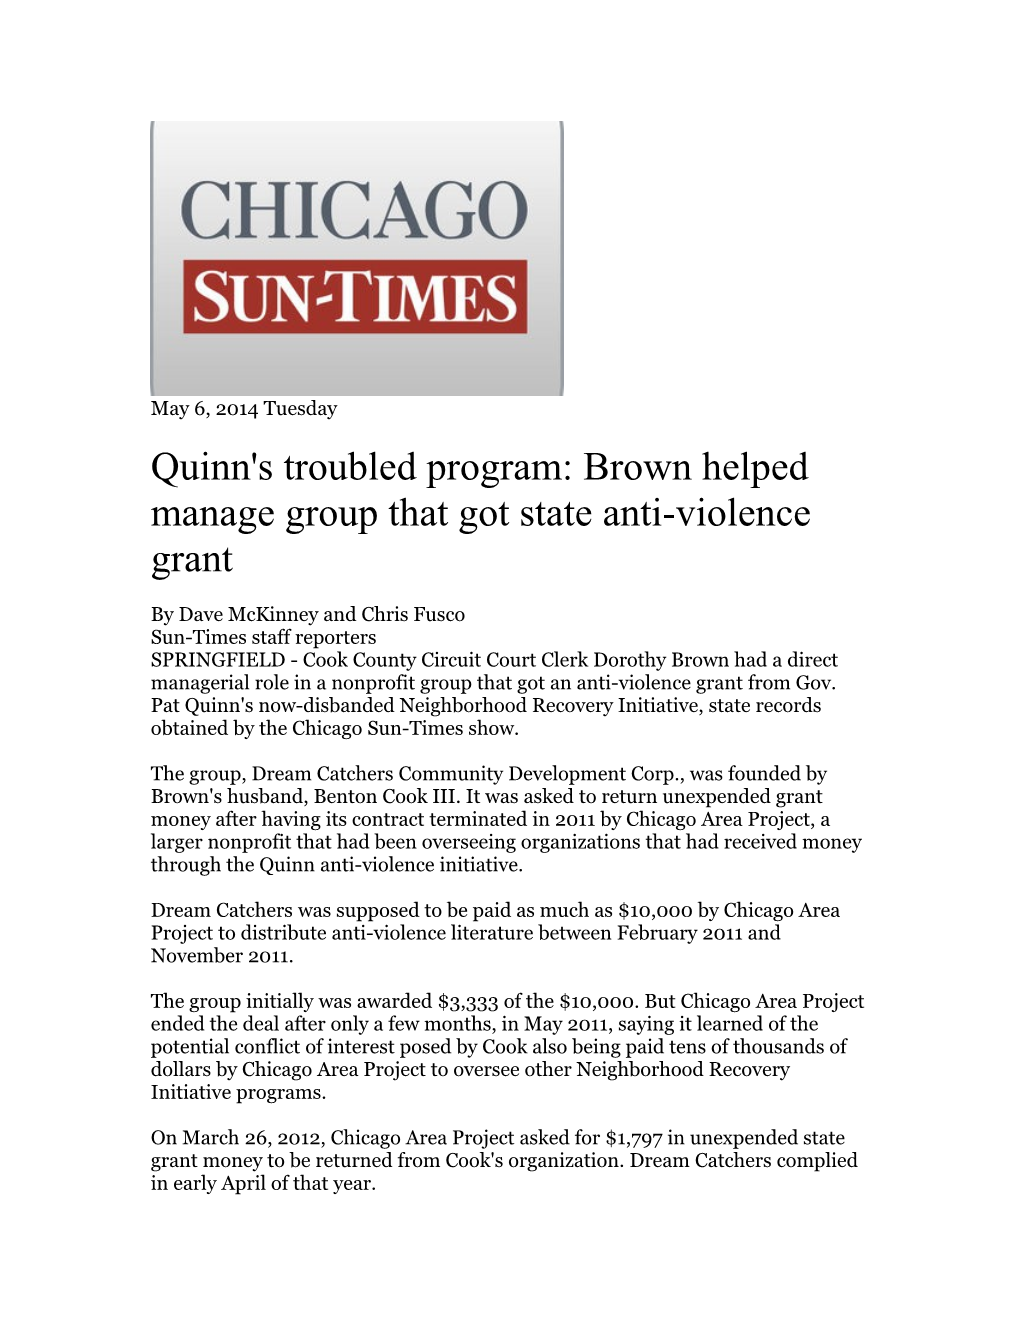 Quinn's Troubled Program: Brown Helped Manage Group That Got State Anti-Violence Grant